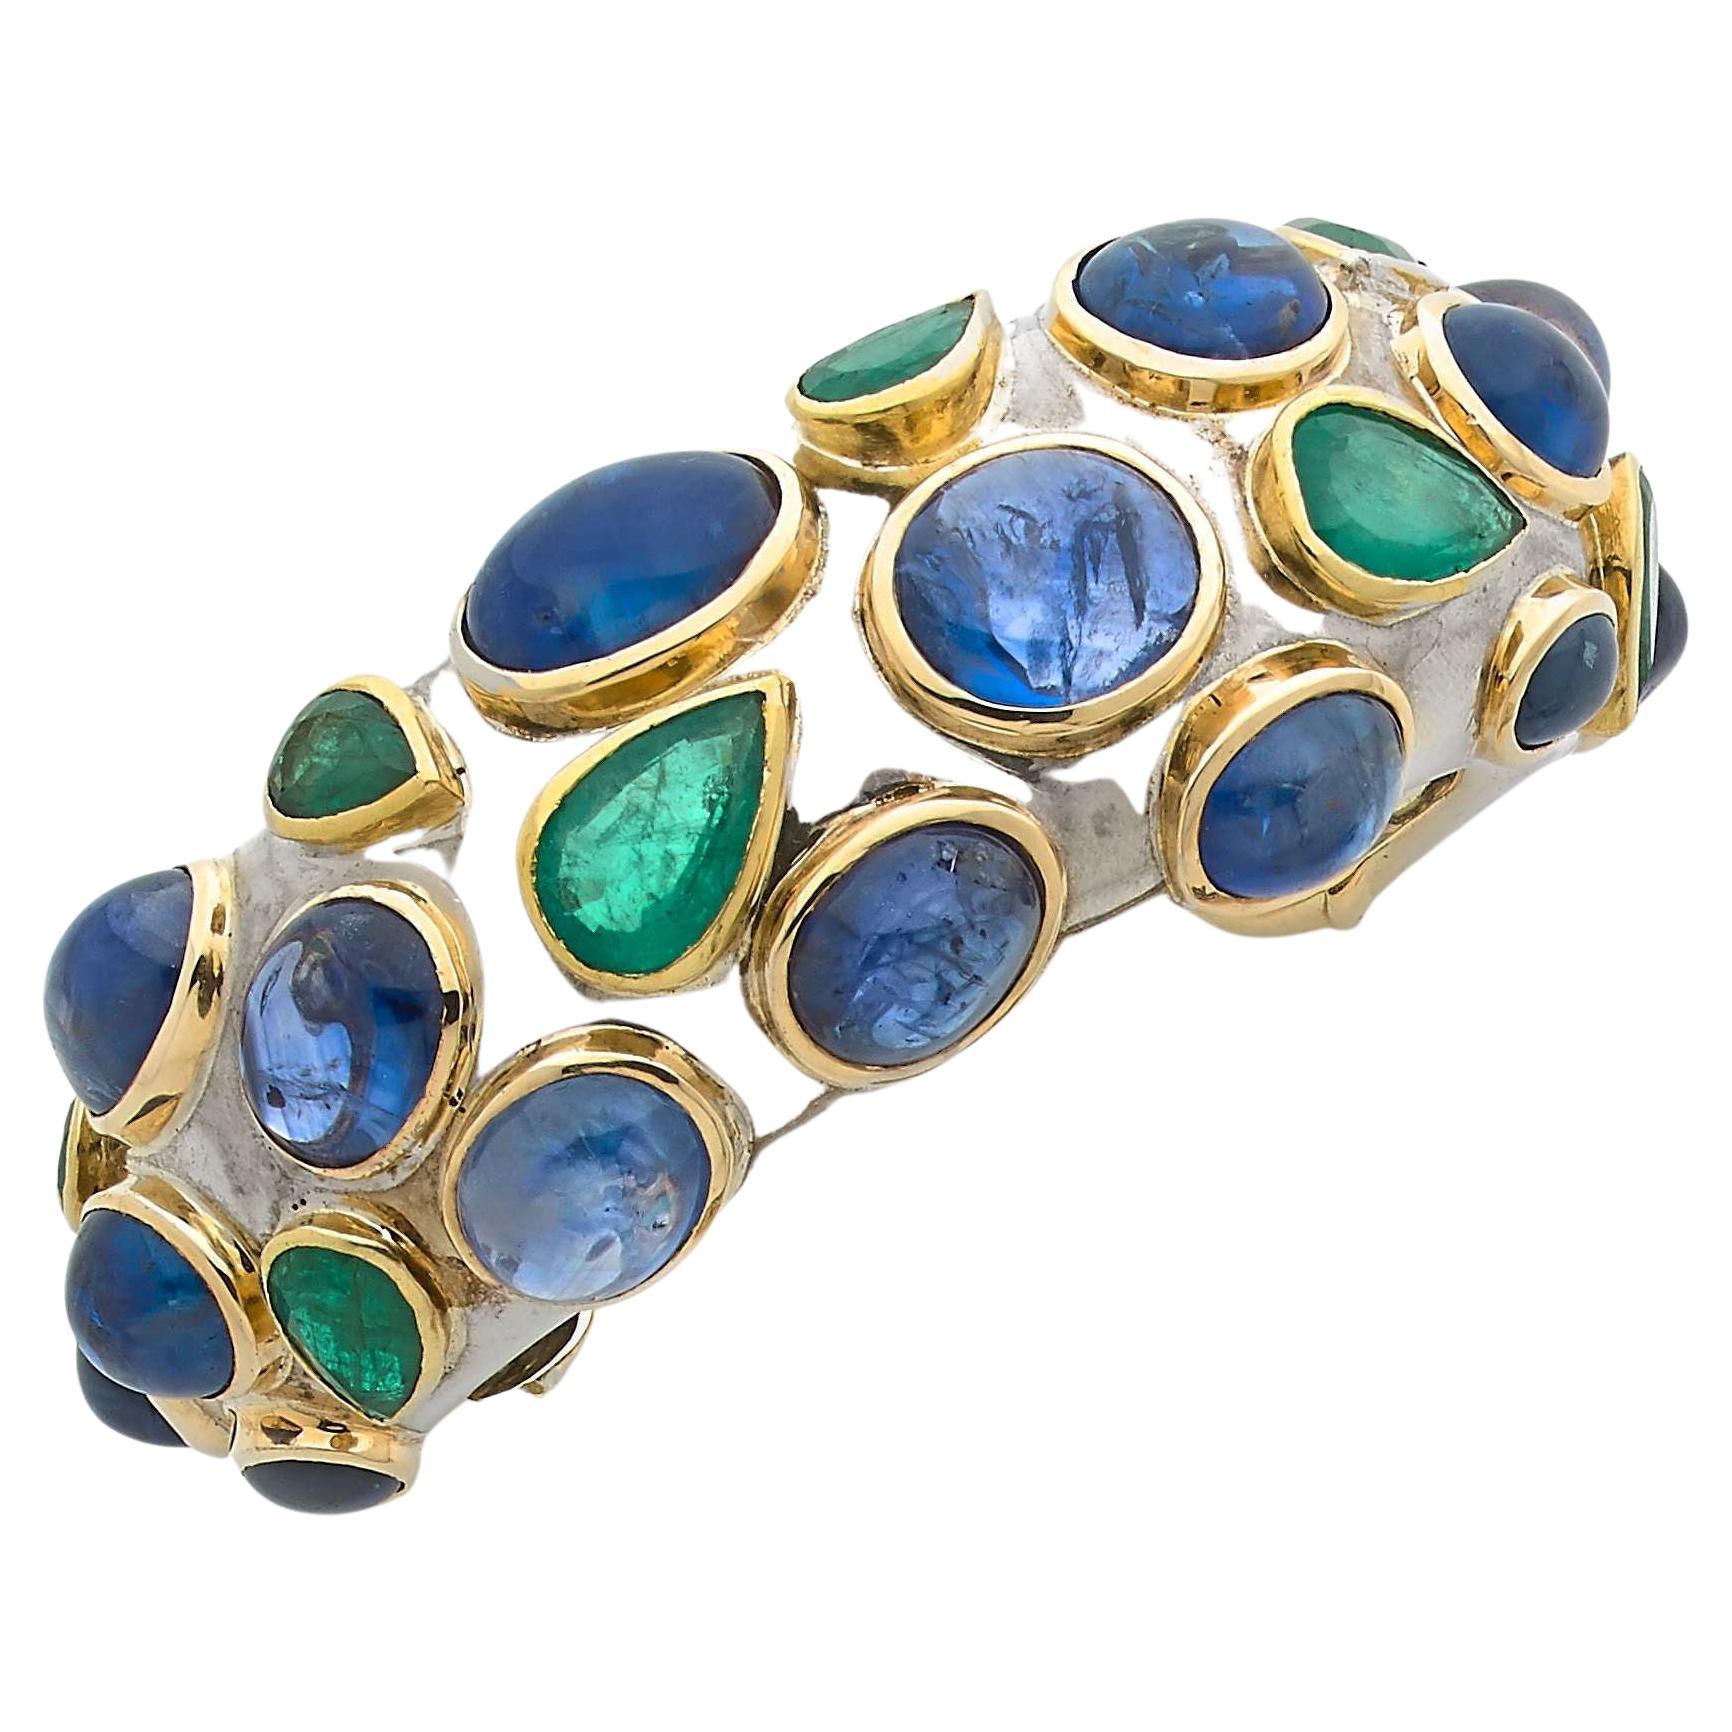 Poiray Sapphire, Emerald, Yellow gold and Silver Bangle Bracelet